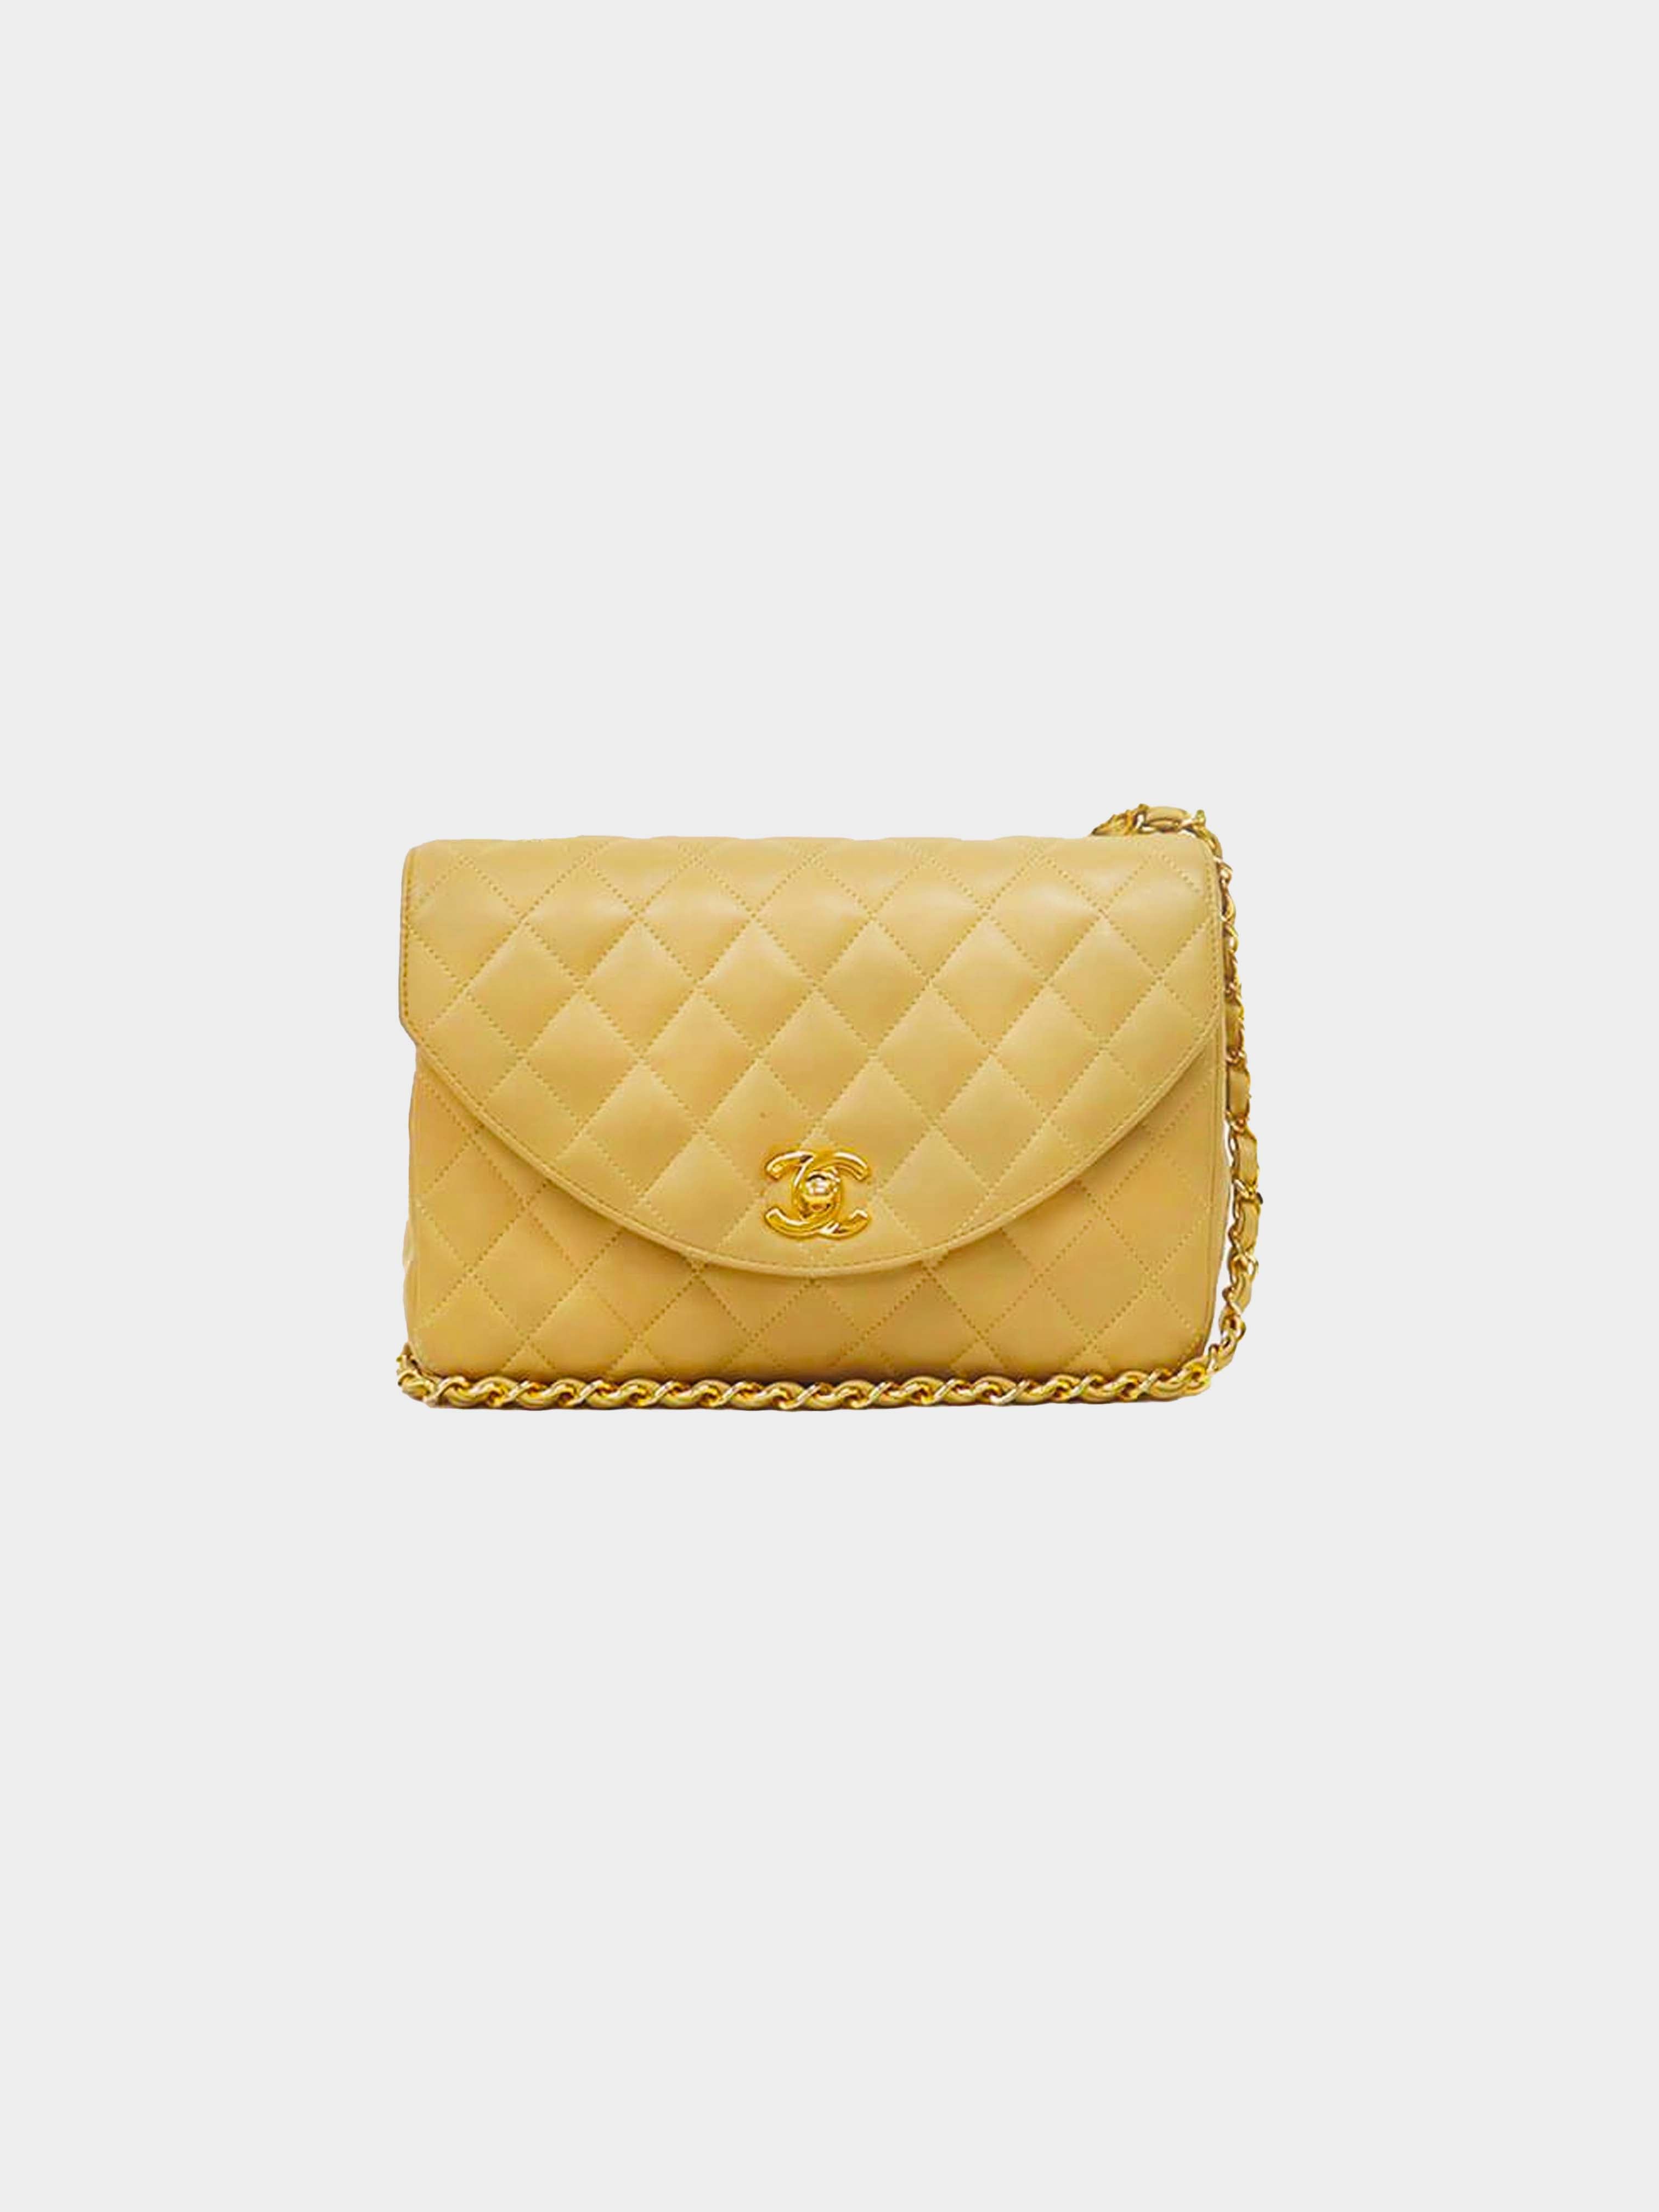 Chanel 1991 Beige Quilted Leather Flap Bag · INTO